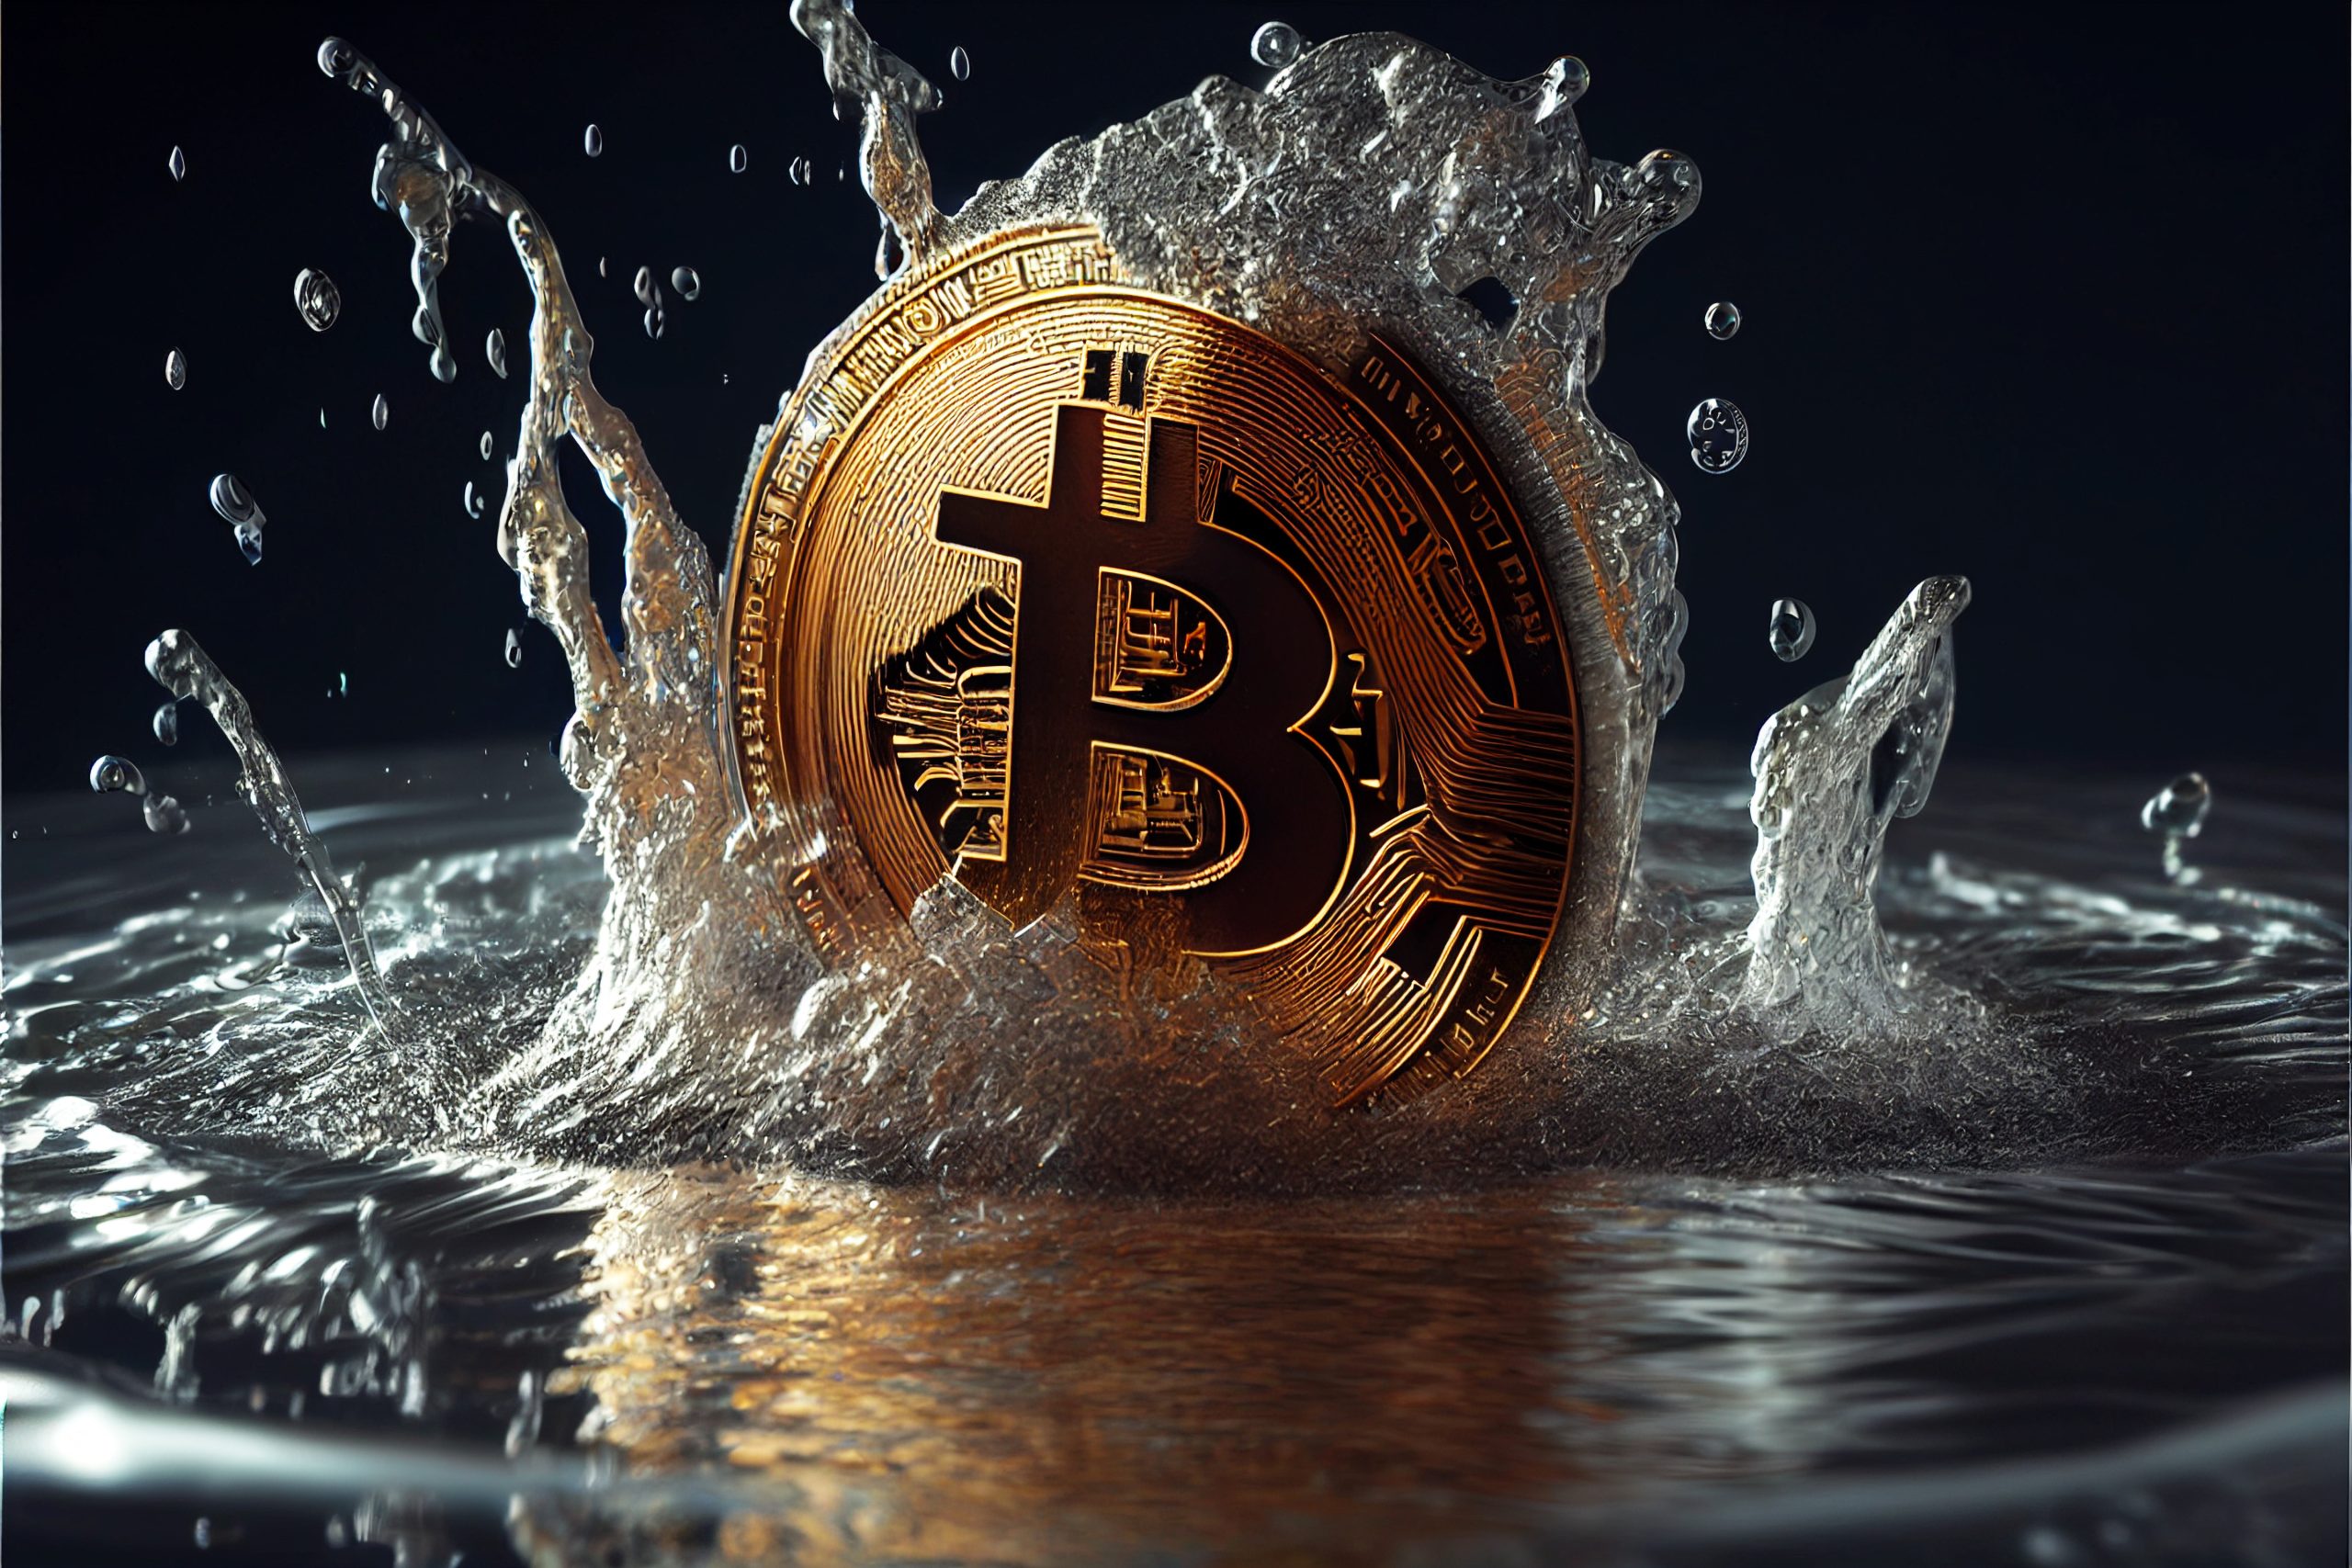 Crab, Fish and Shark BTC Accumulation Stabilizes – What This Means For the Bitcoin Price